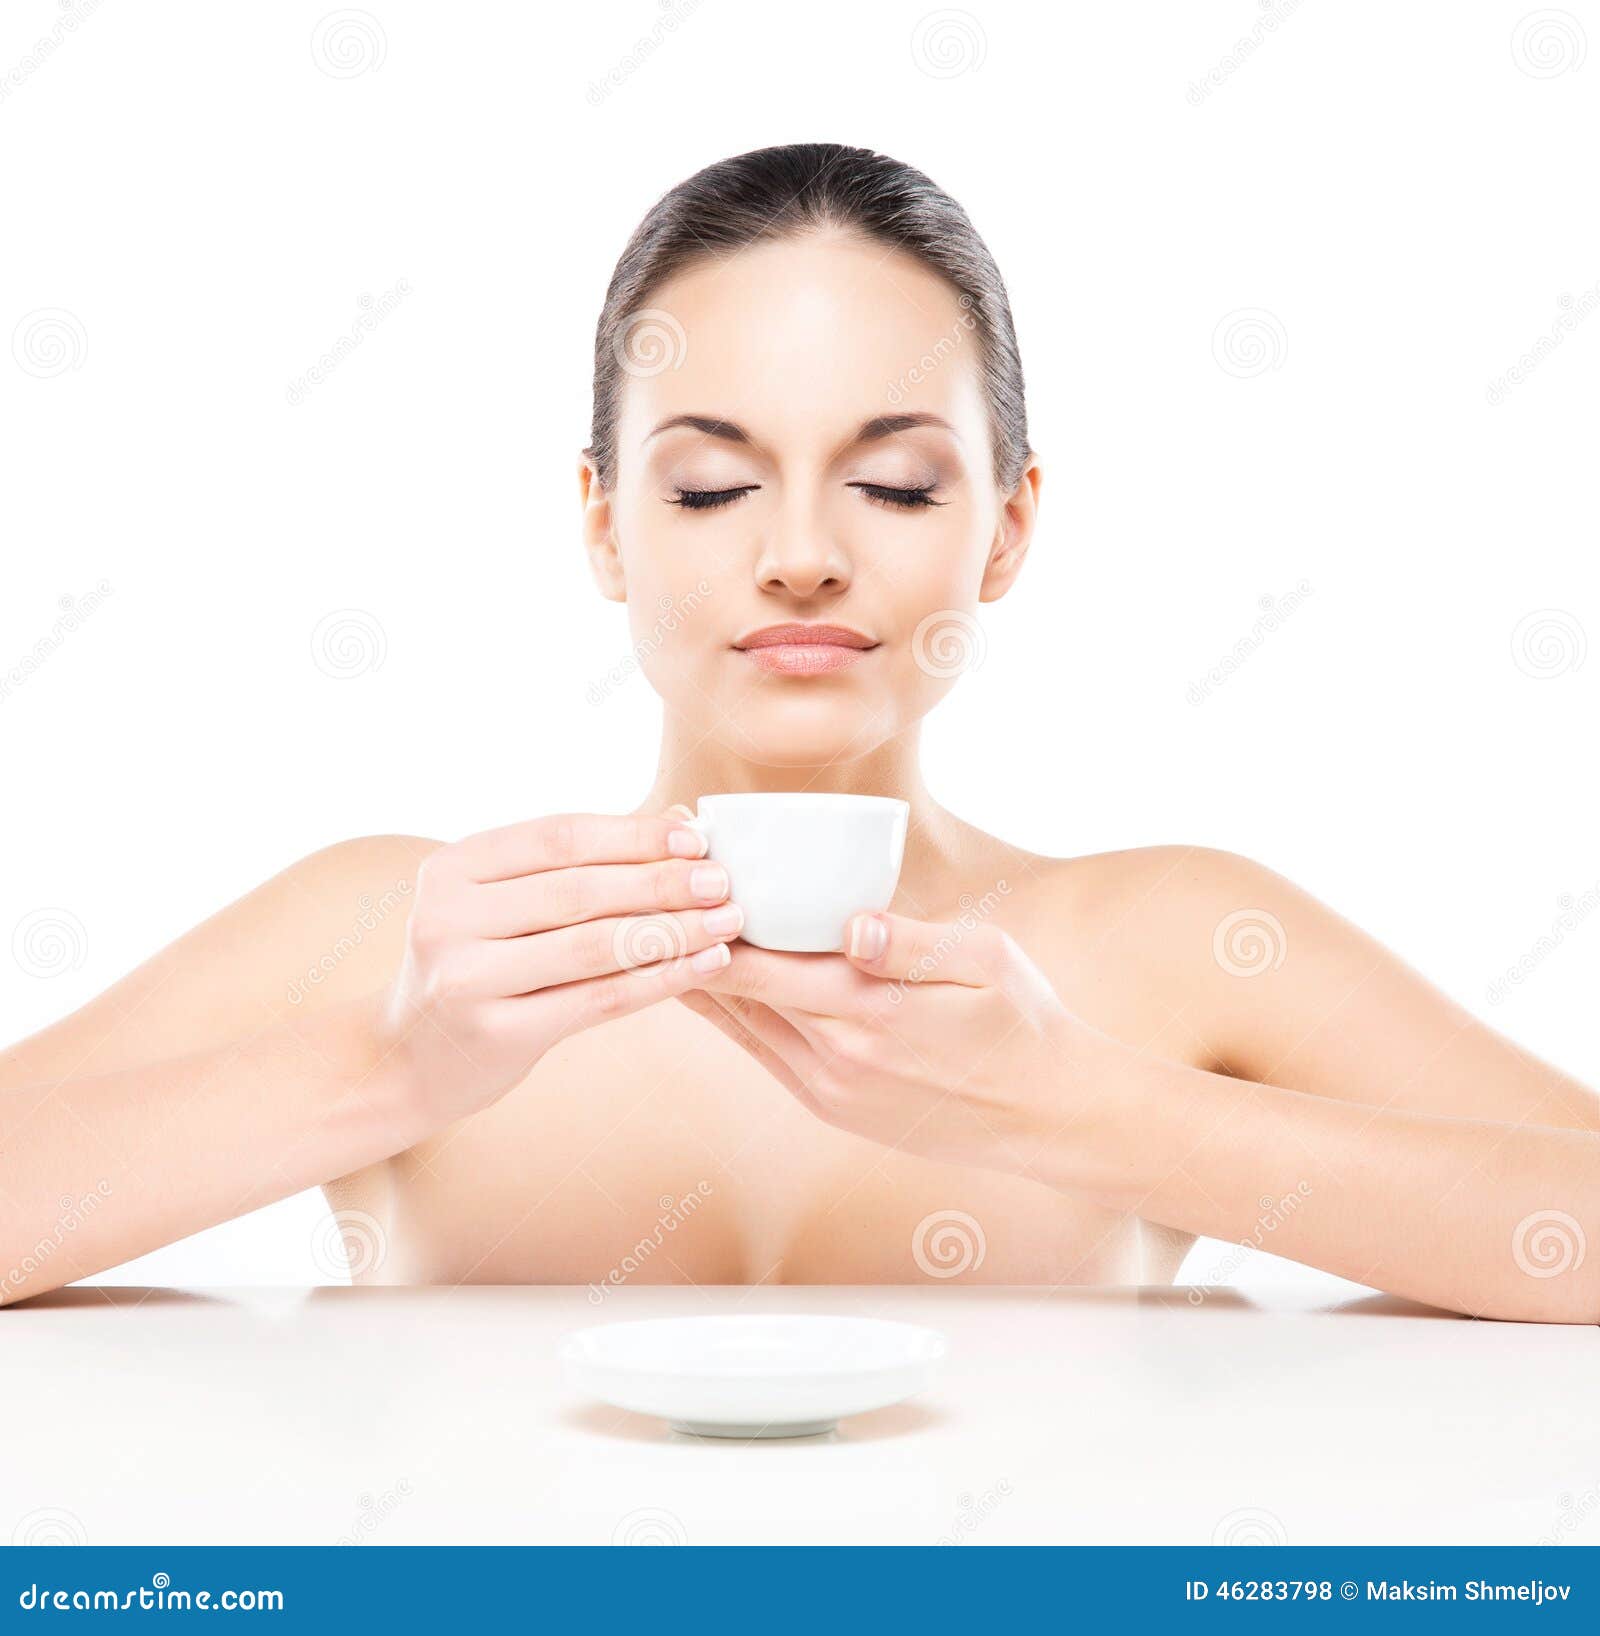 Naked woman drinking coffee